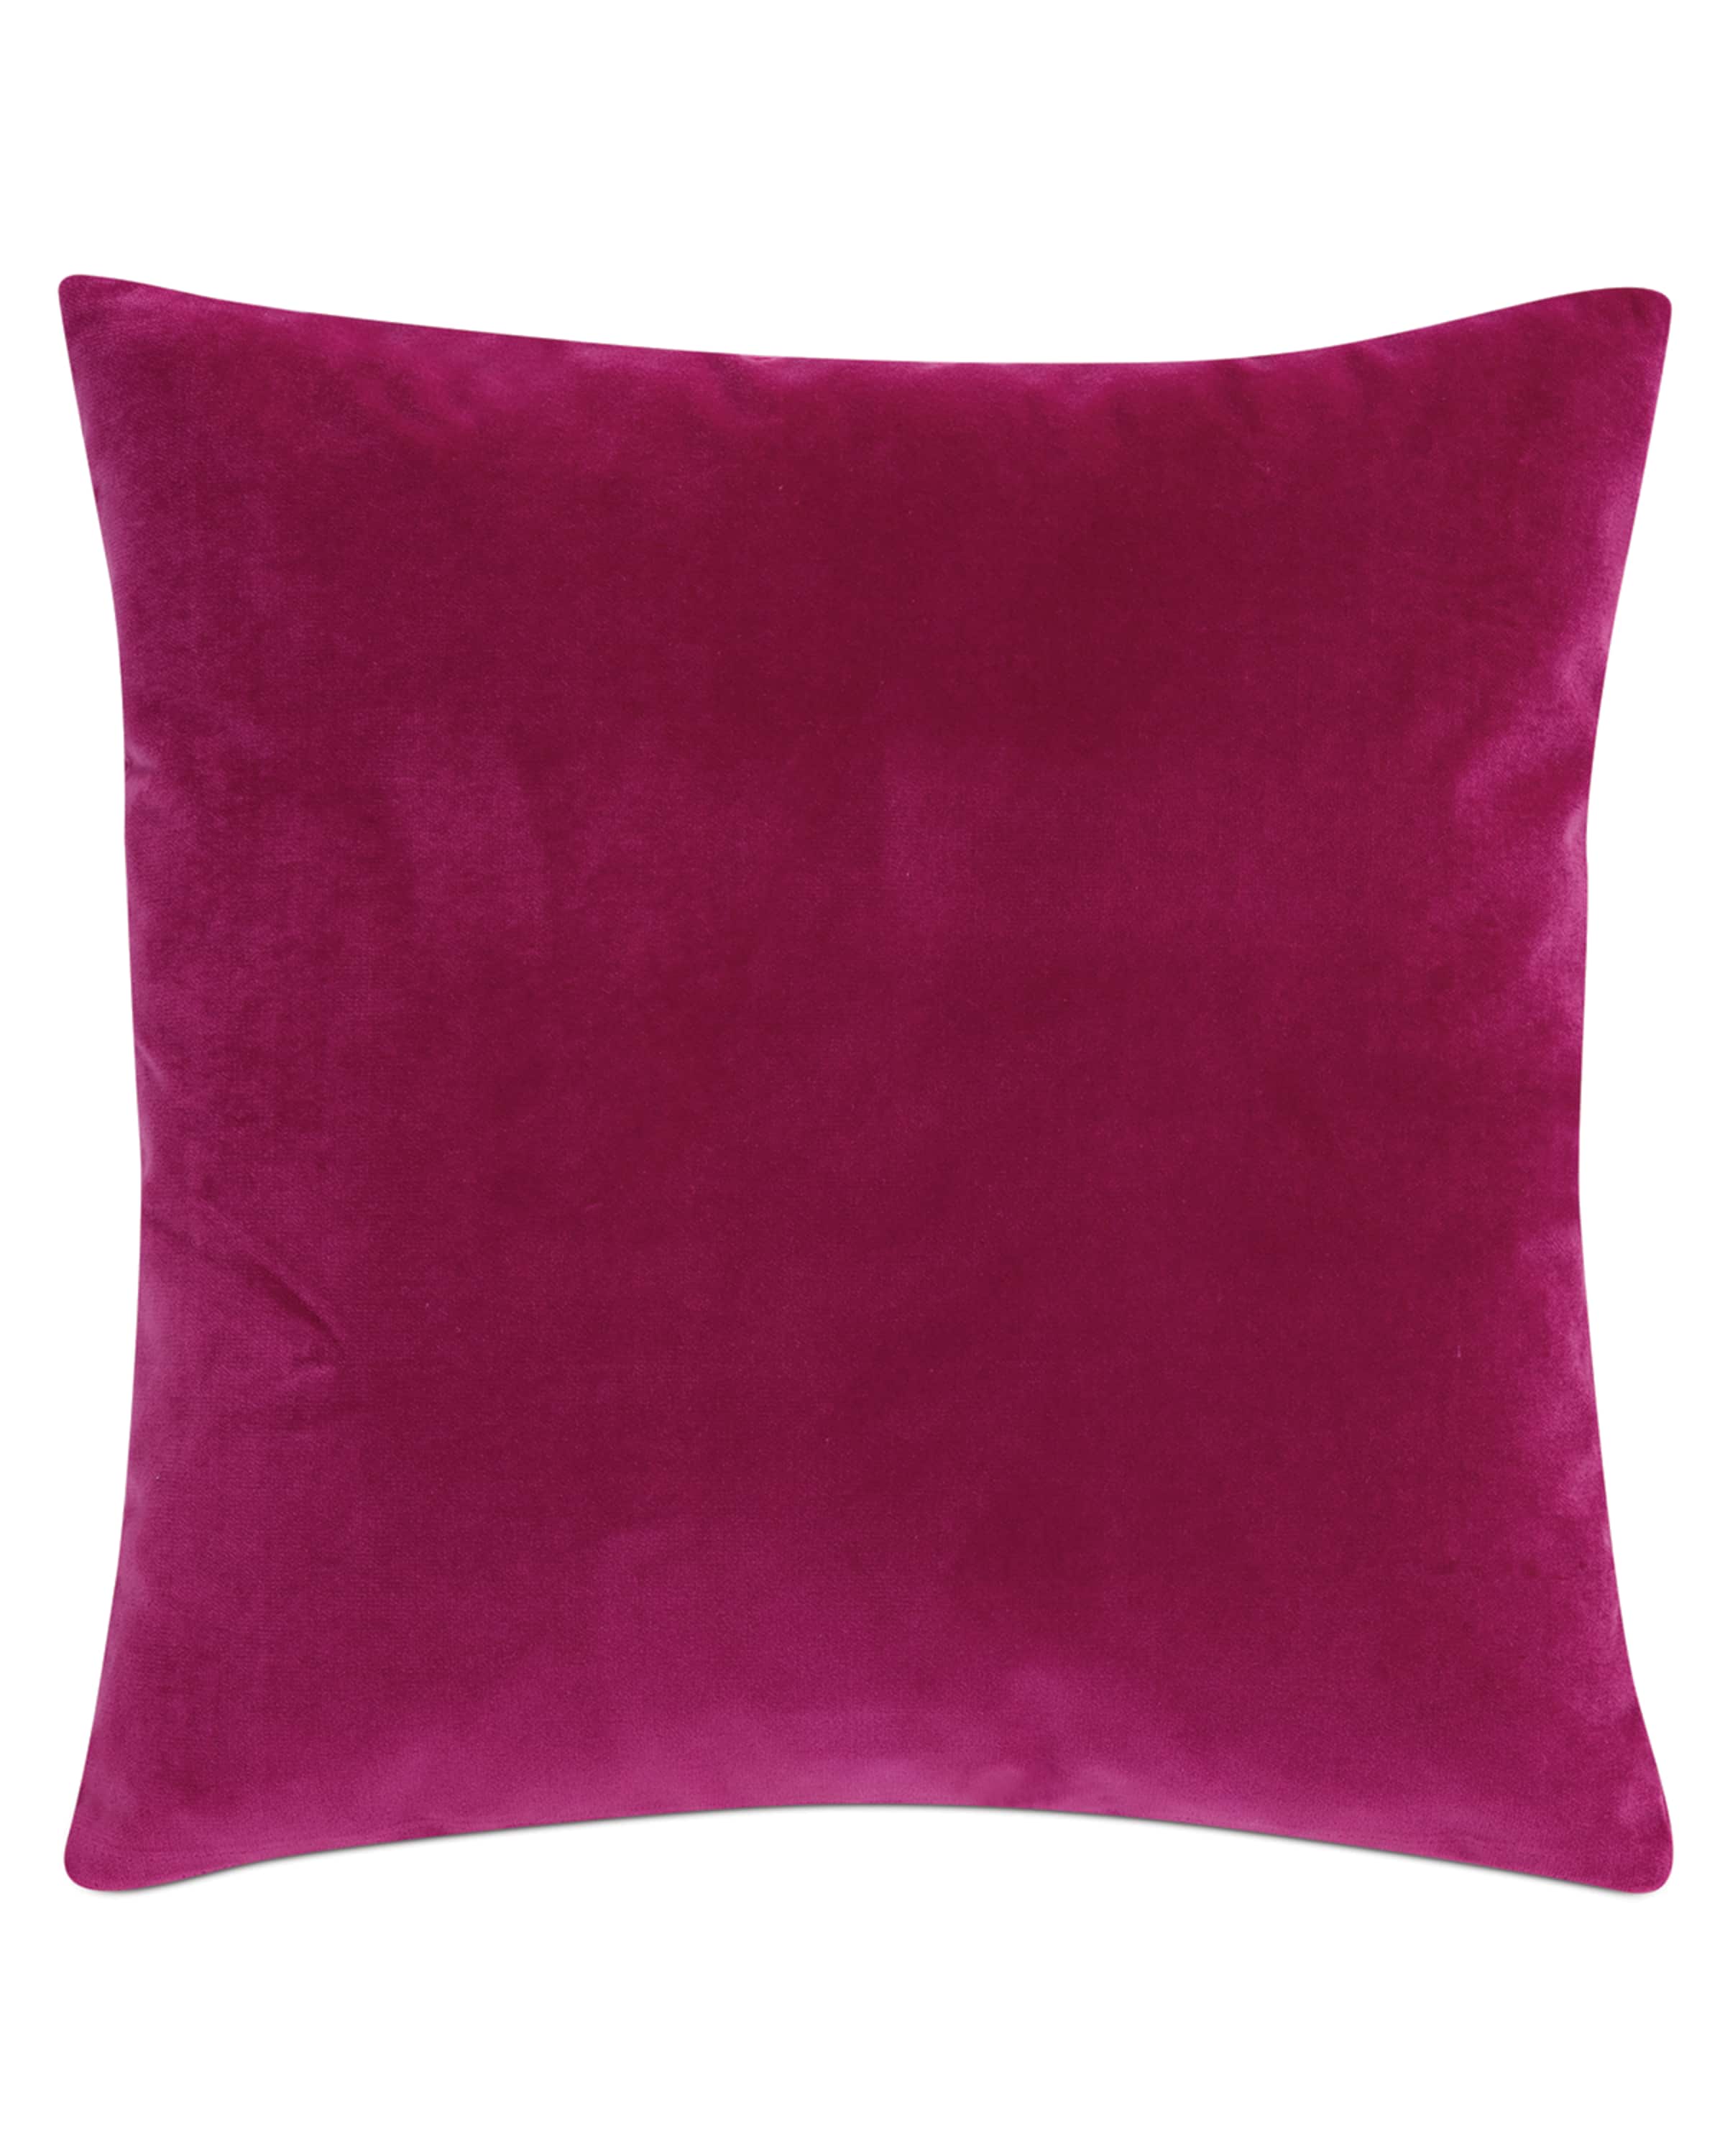 Eastern Accents Sloane Decorative Pillow